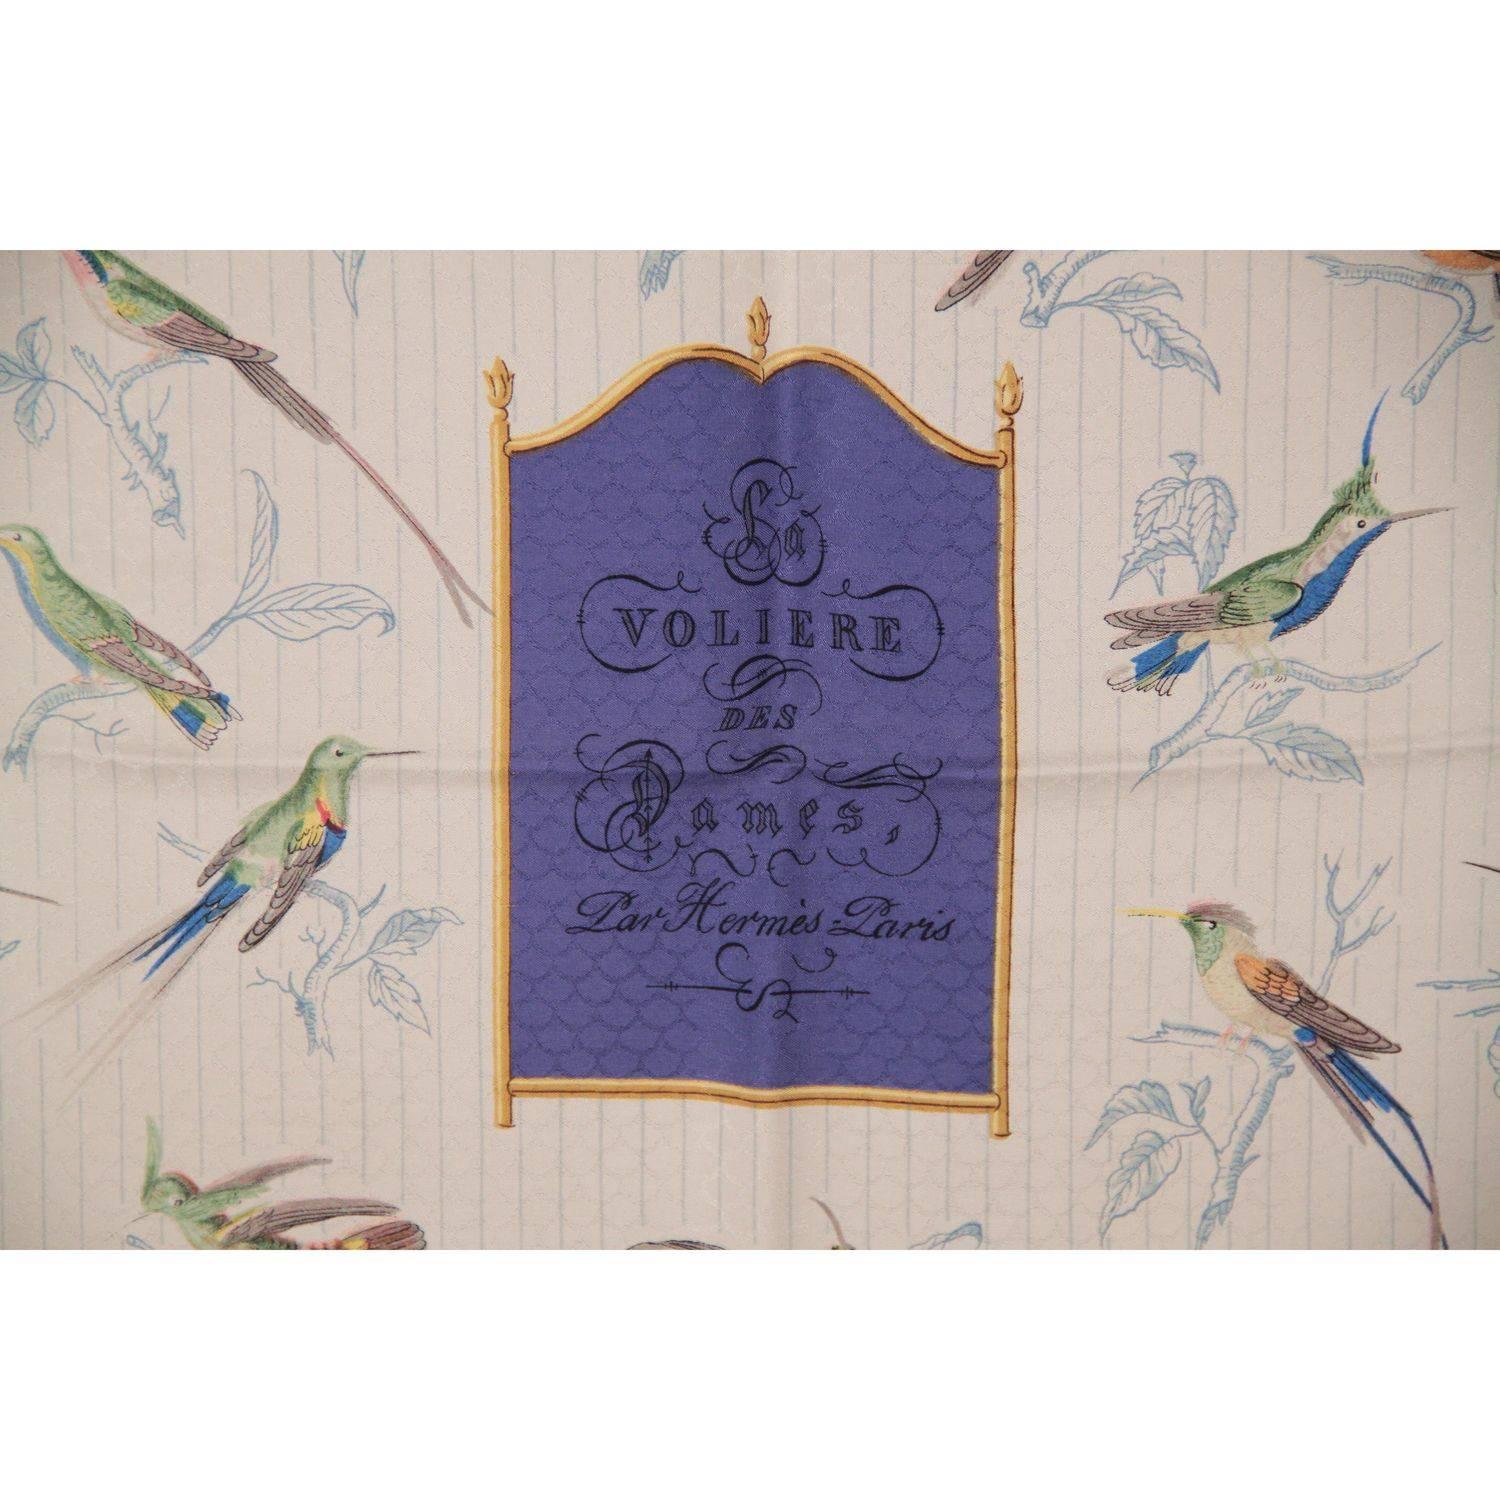 HERMES Vintage SILK JACQUARD SCARF Voliere Des Dames 1958 Grygkar In Good Condition In Rome, Rome